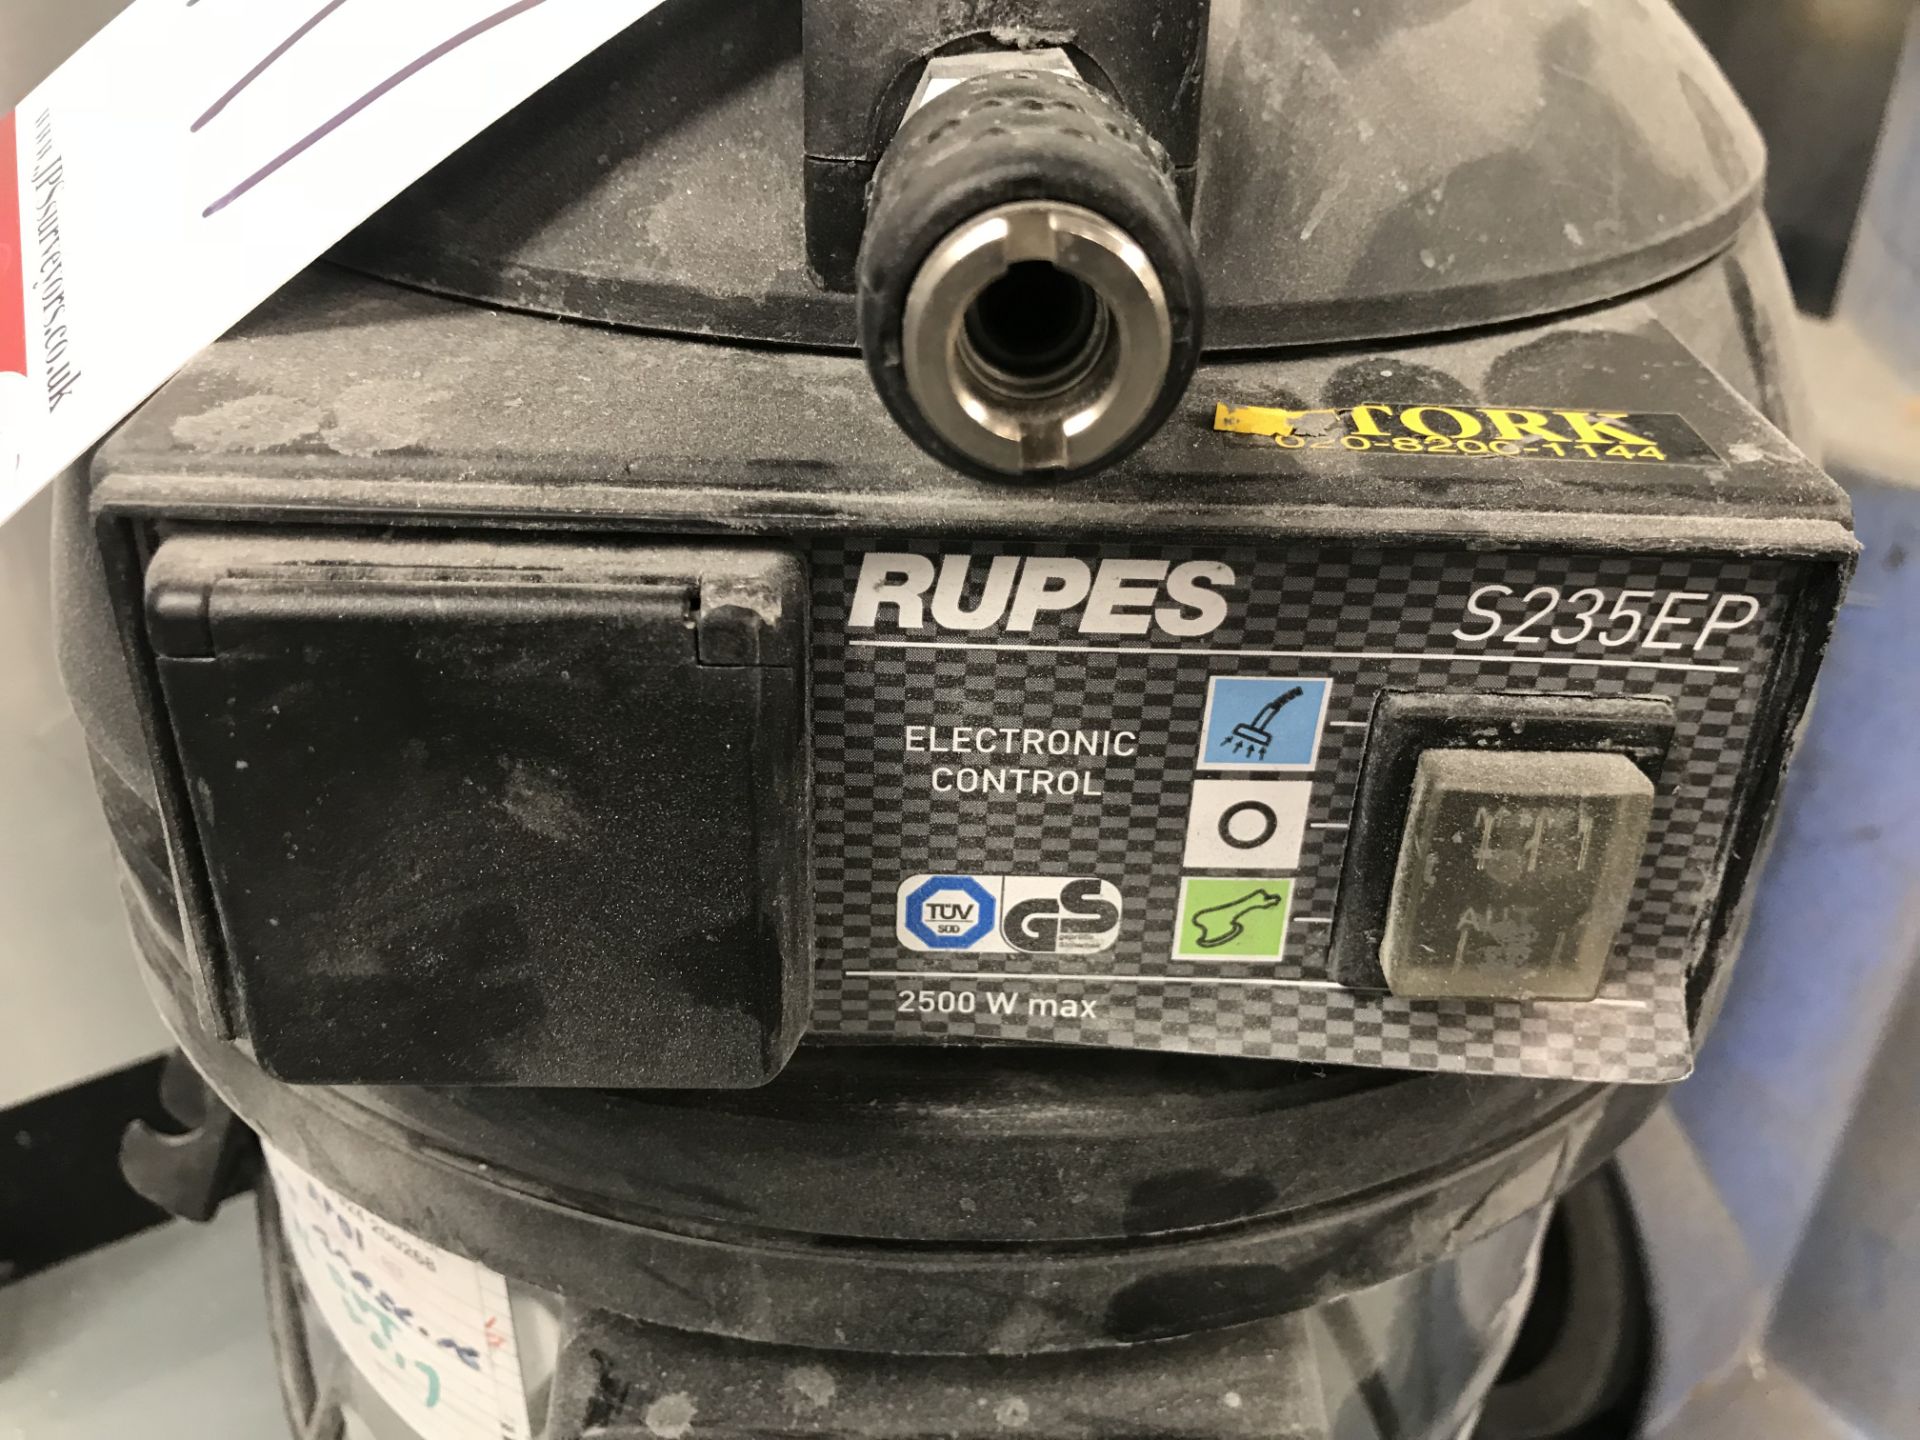 Rupes S235EP Vacuum Cleaner - Image 2 of 2